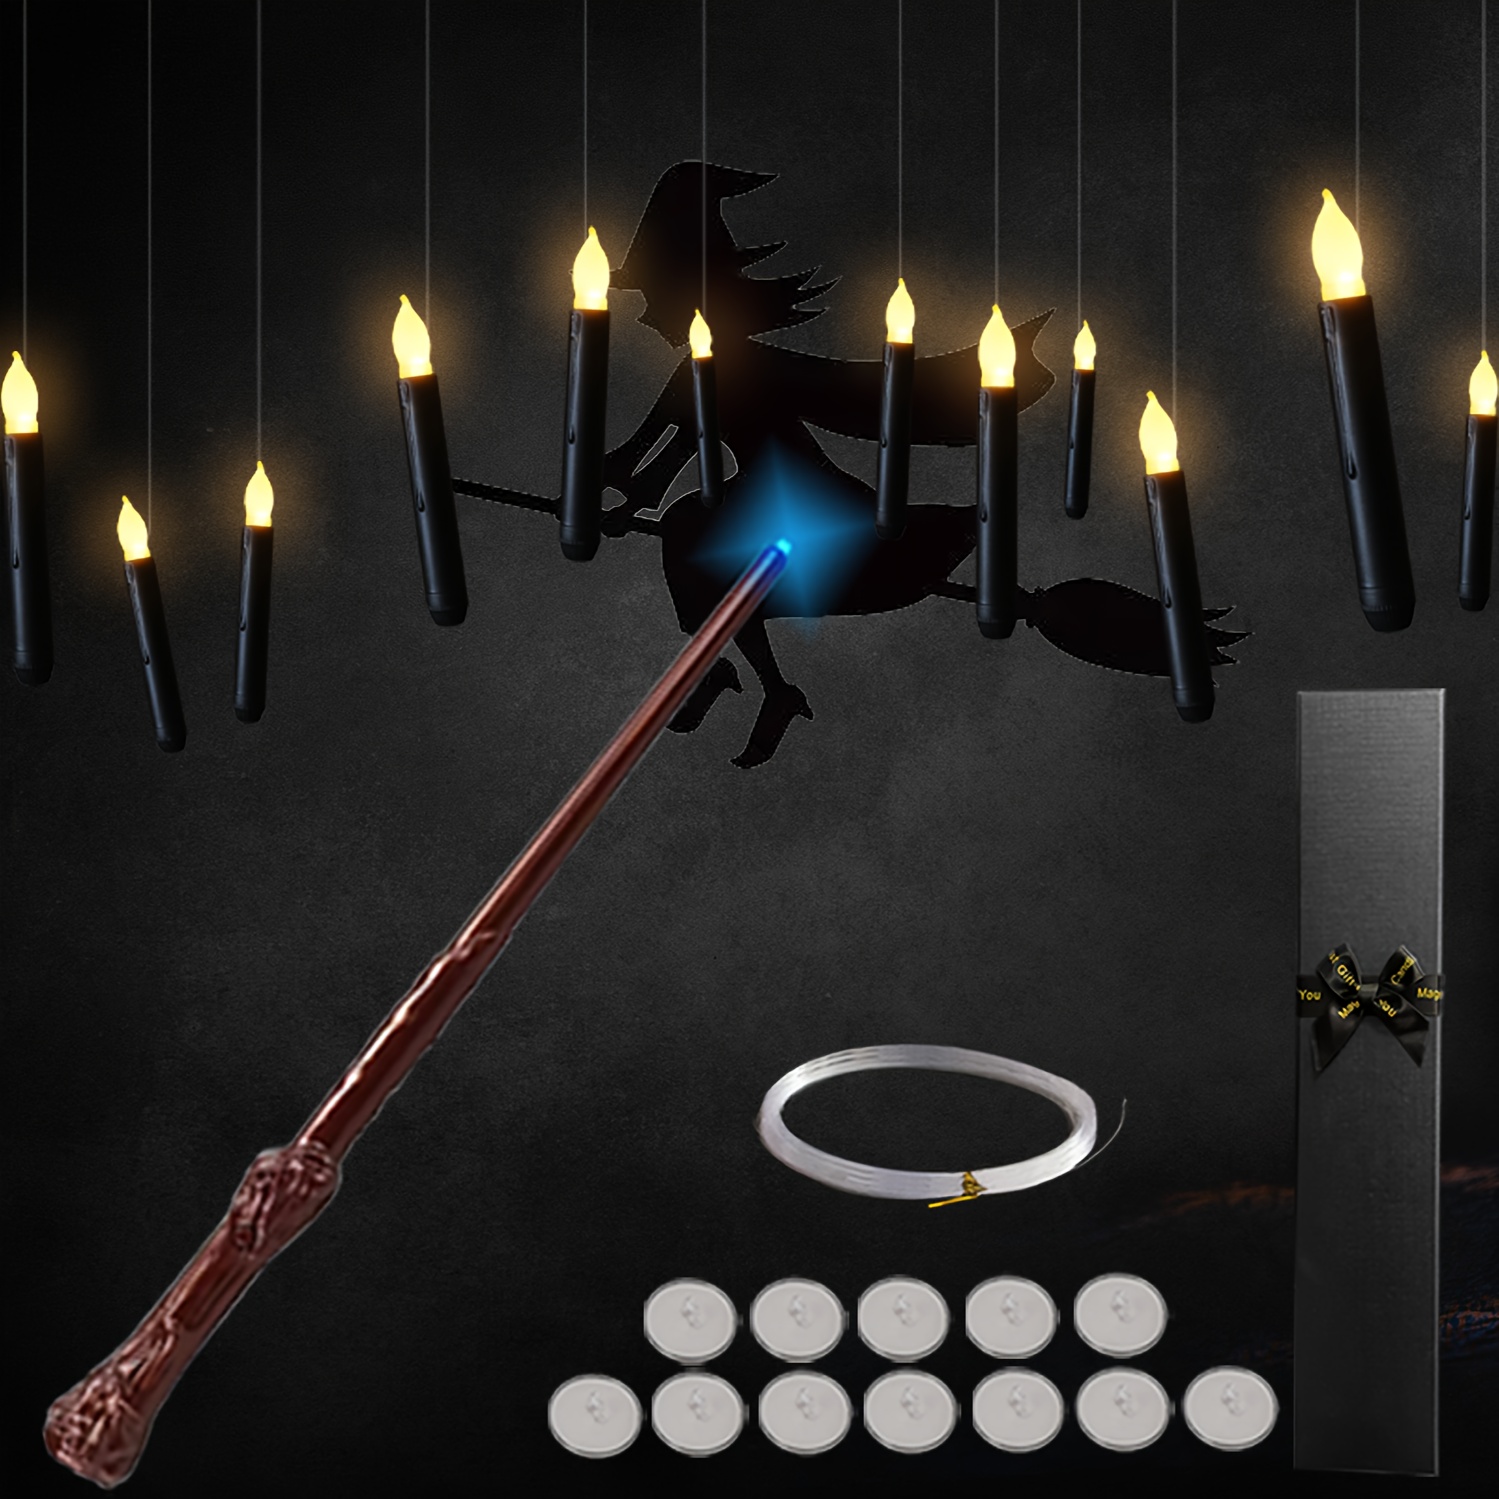 Floating Candles with Wand, 20 PCs Magic Hanging Candles, Flickering Warm  Light Flameless Floating LED Candle with Wand Remote, Battery Operated  Window Taper Candle Set for Halloween Decorations